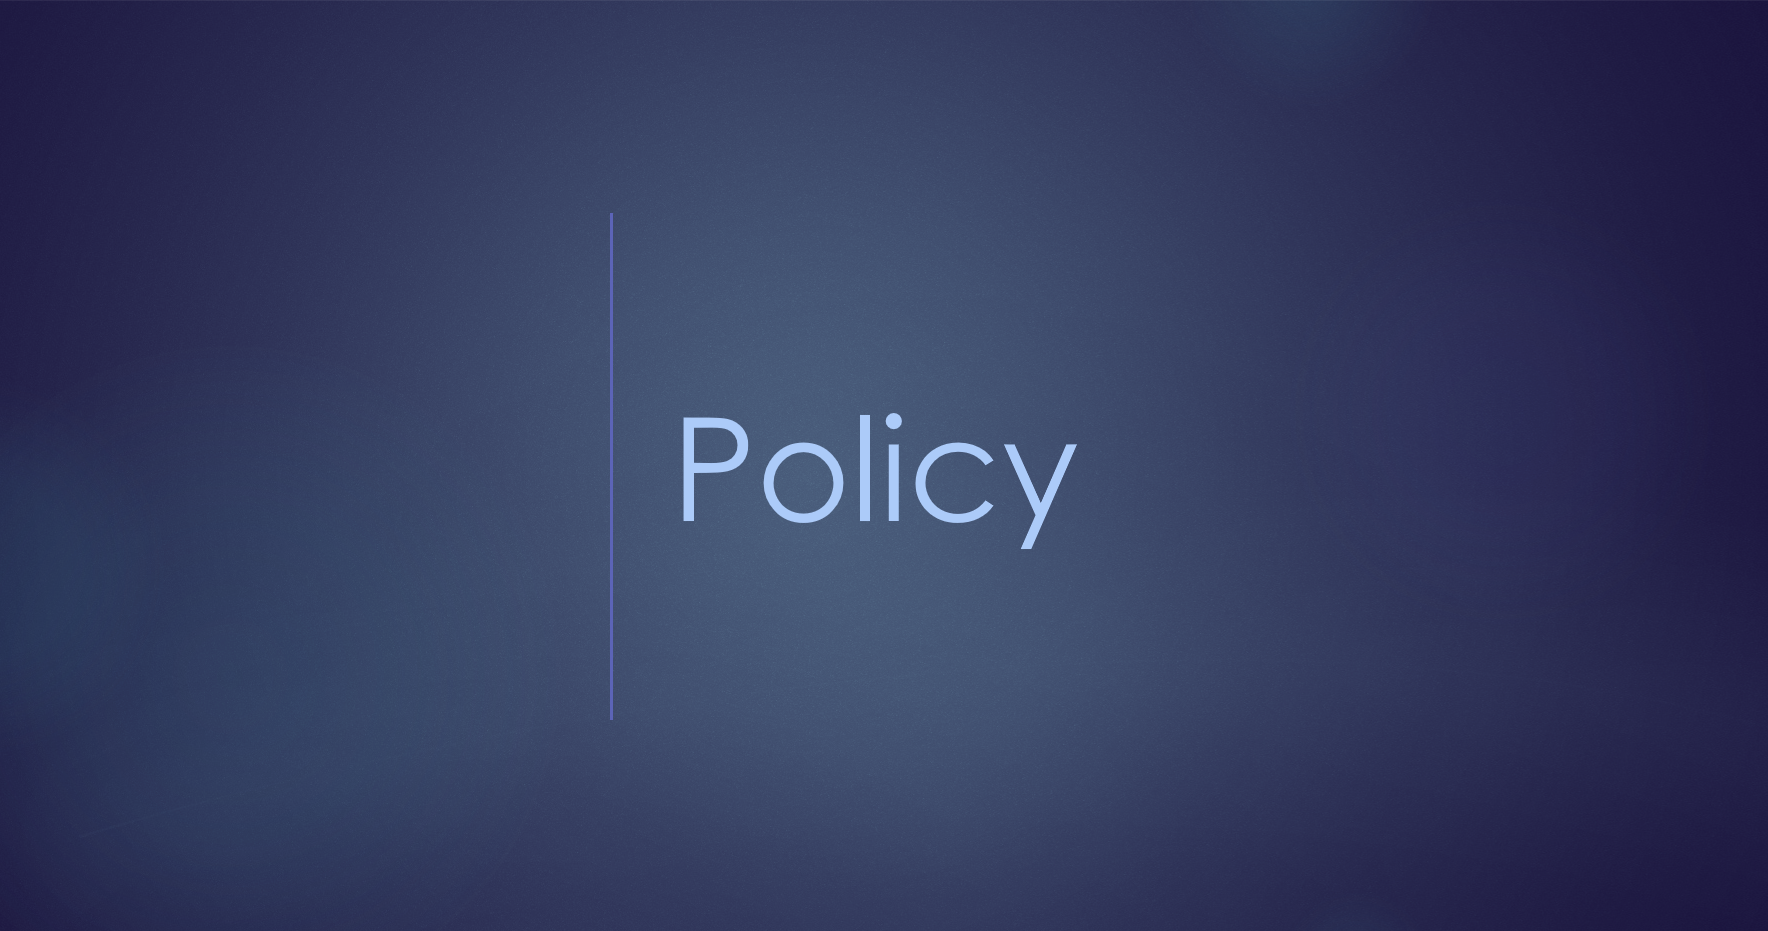 Policy Image